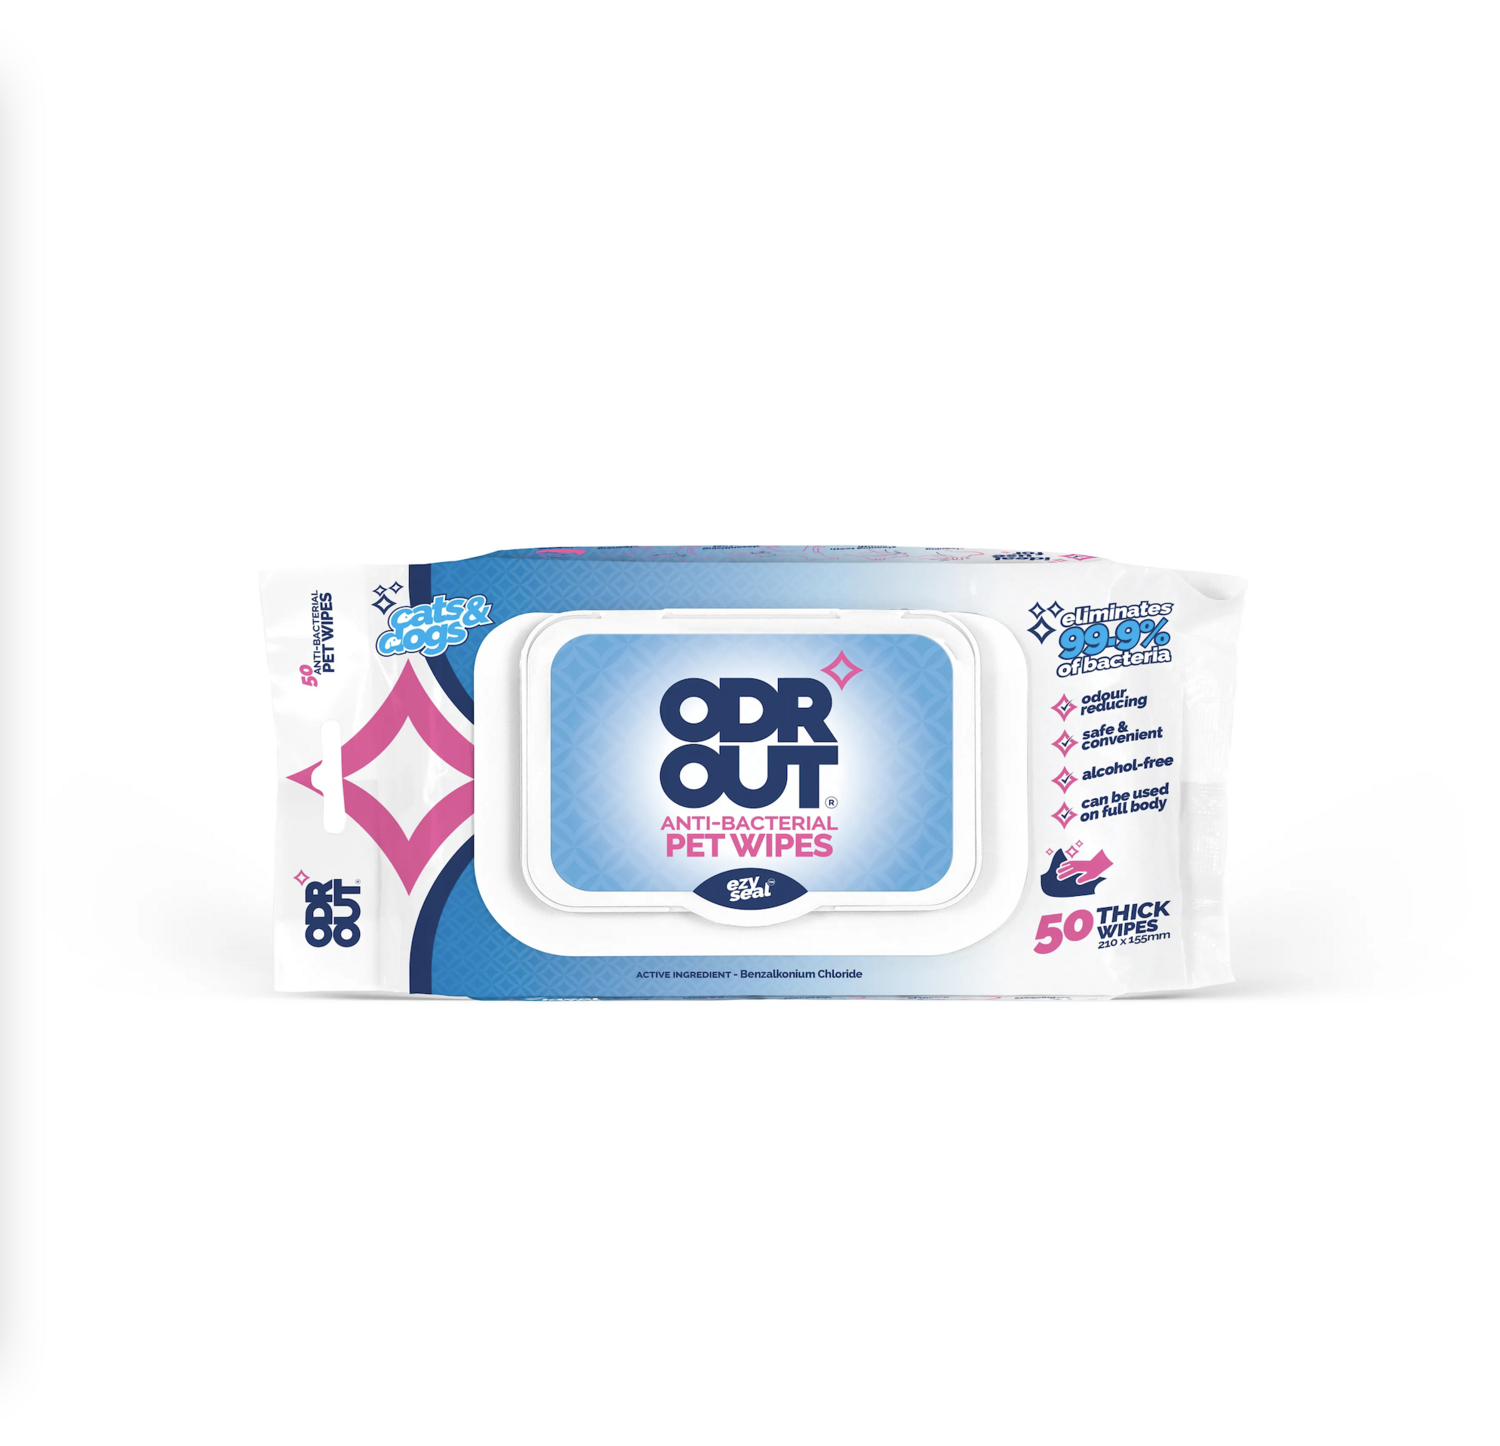 ODROUT antibacterial pet wipes. 50 thick wipes.